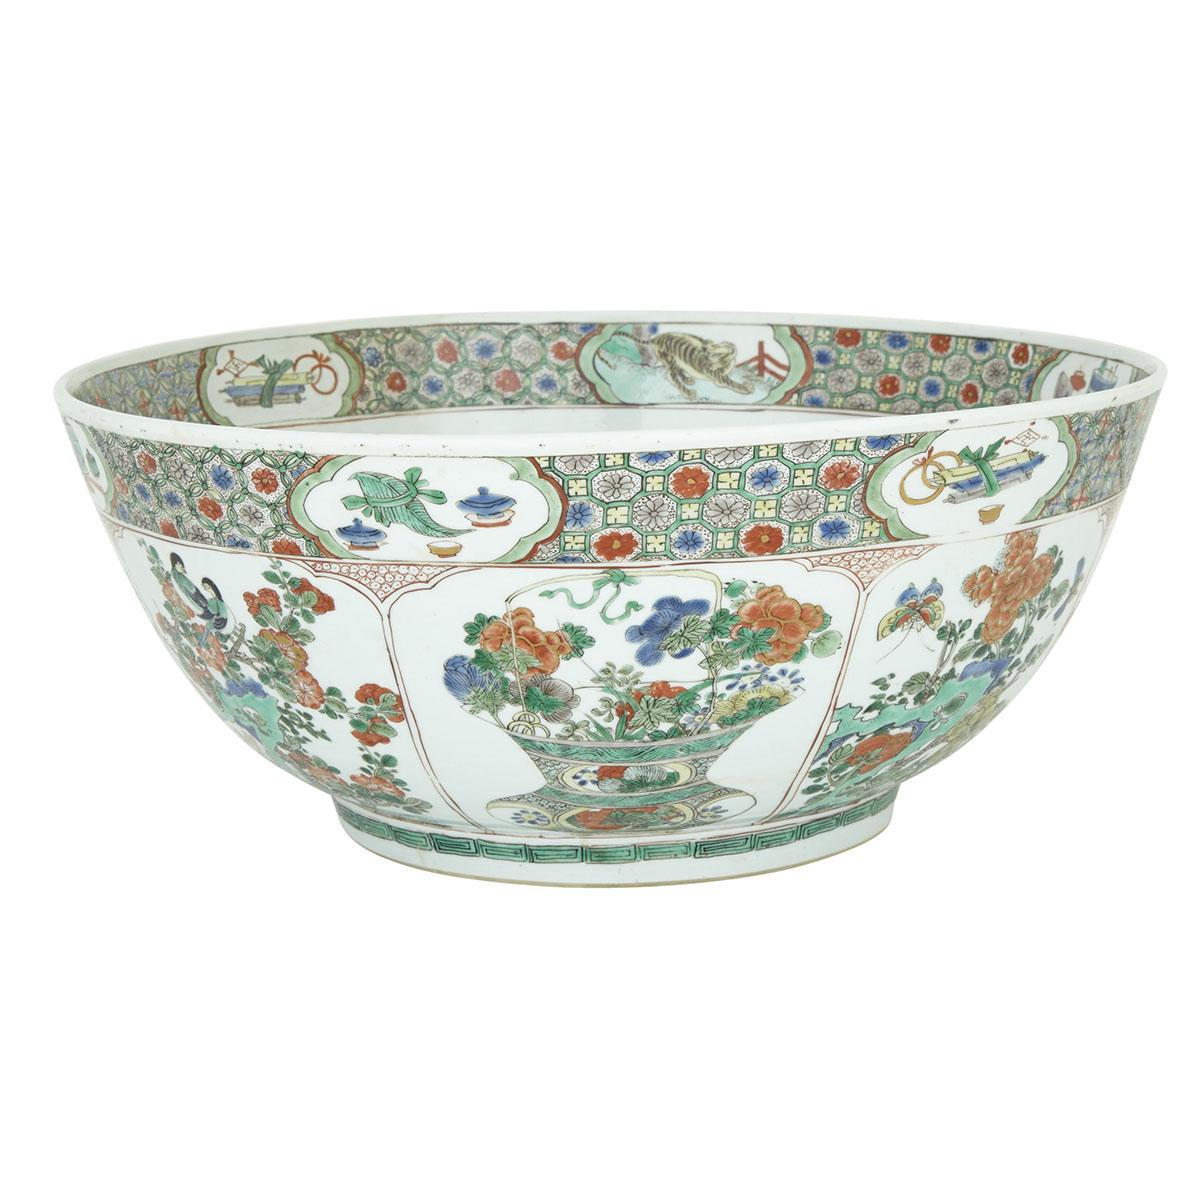 A MASSIVE FAMILLE-VERTE WUCAI PUNCH BOWL, MARK AND PERIOD OF KANGXI (1662-1772) 清康熙 五彩牡丹瑞果紋大碗 Finely - Image 3 of 10